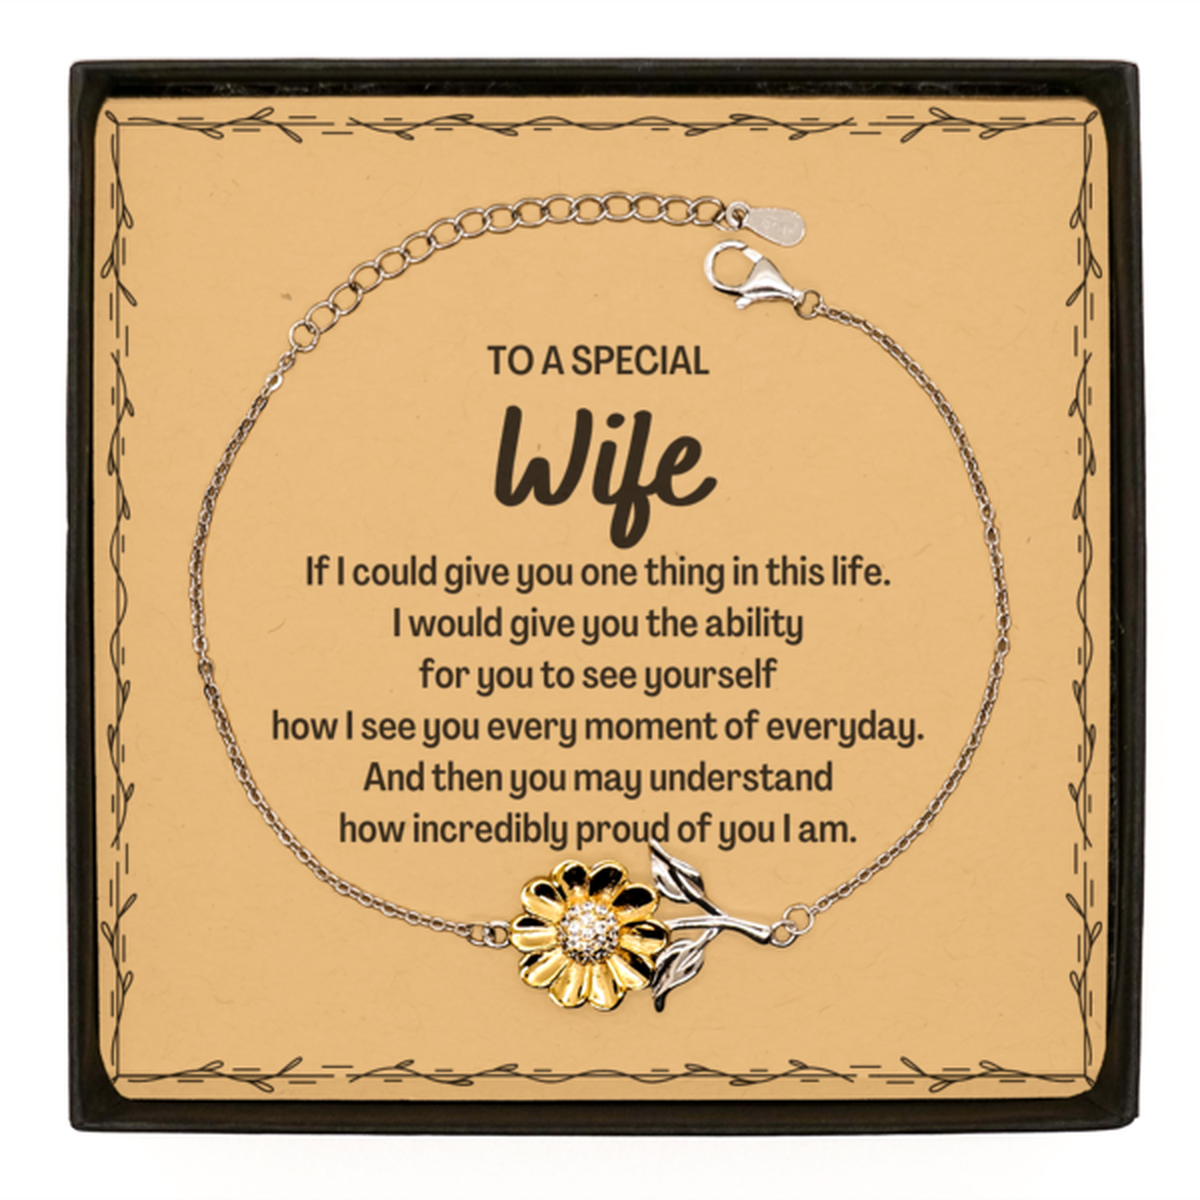 To My Wife Sunflower Bracelet, Gifts For Wife Message Card, Inspirational Gifts for Christmas Birthday, Epic Gifts for Wife To A Special Wife how incredibly proud of you I am